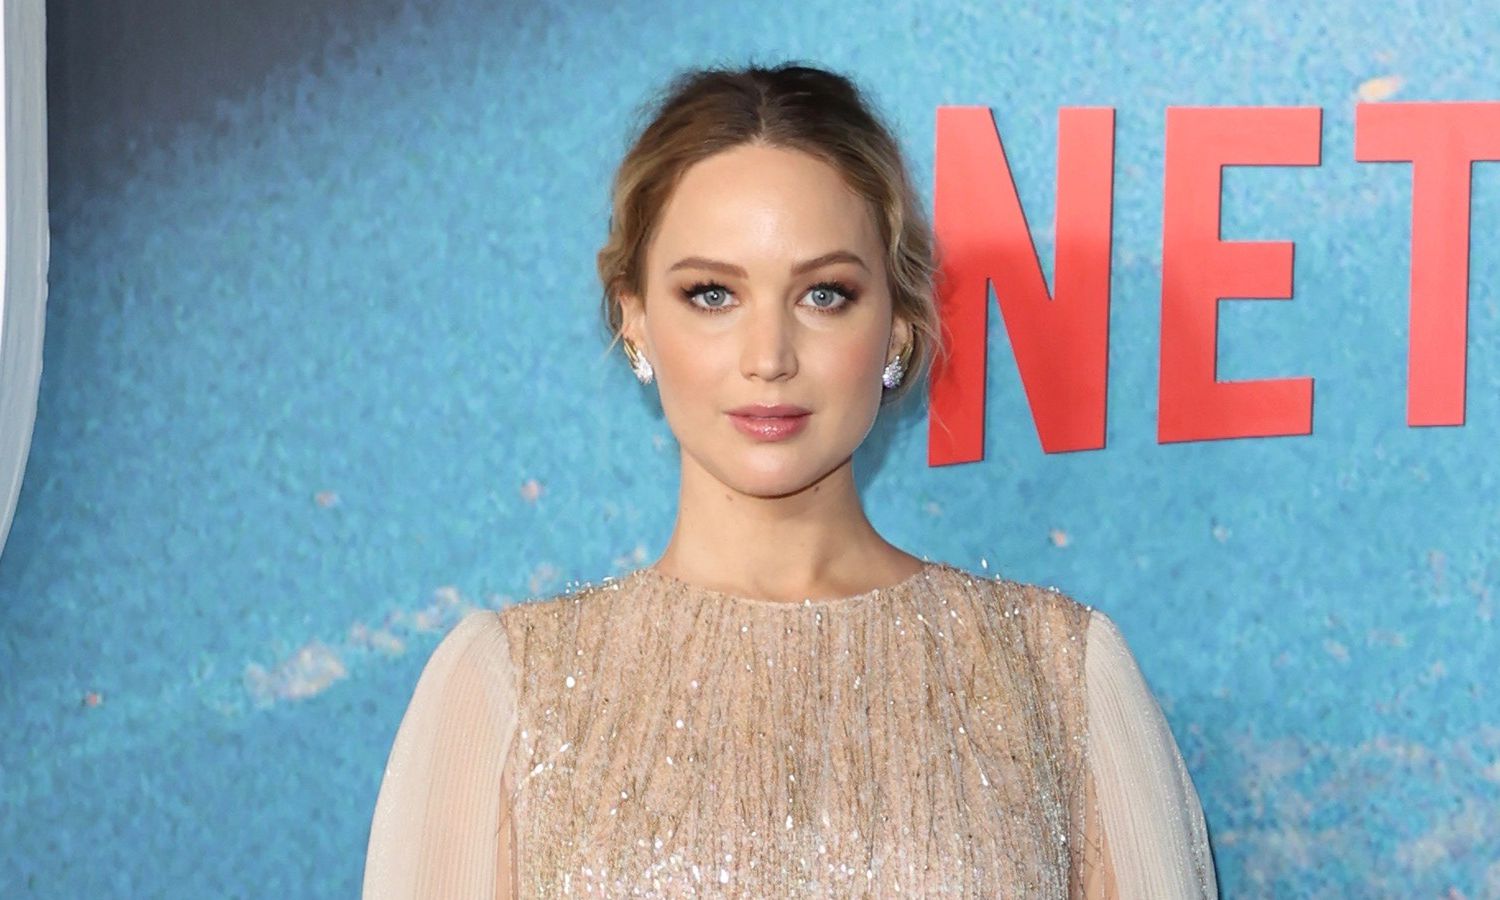 Jennifer Lawrence shows off her pregnancy on the red carpet